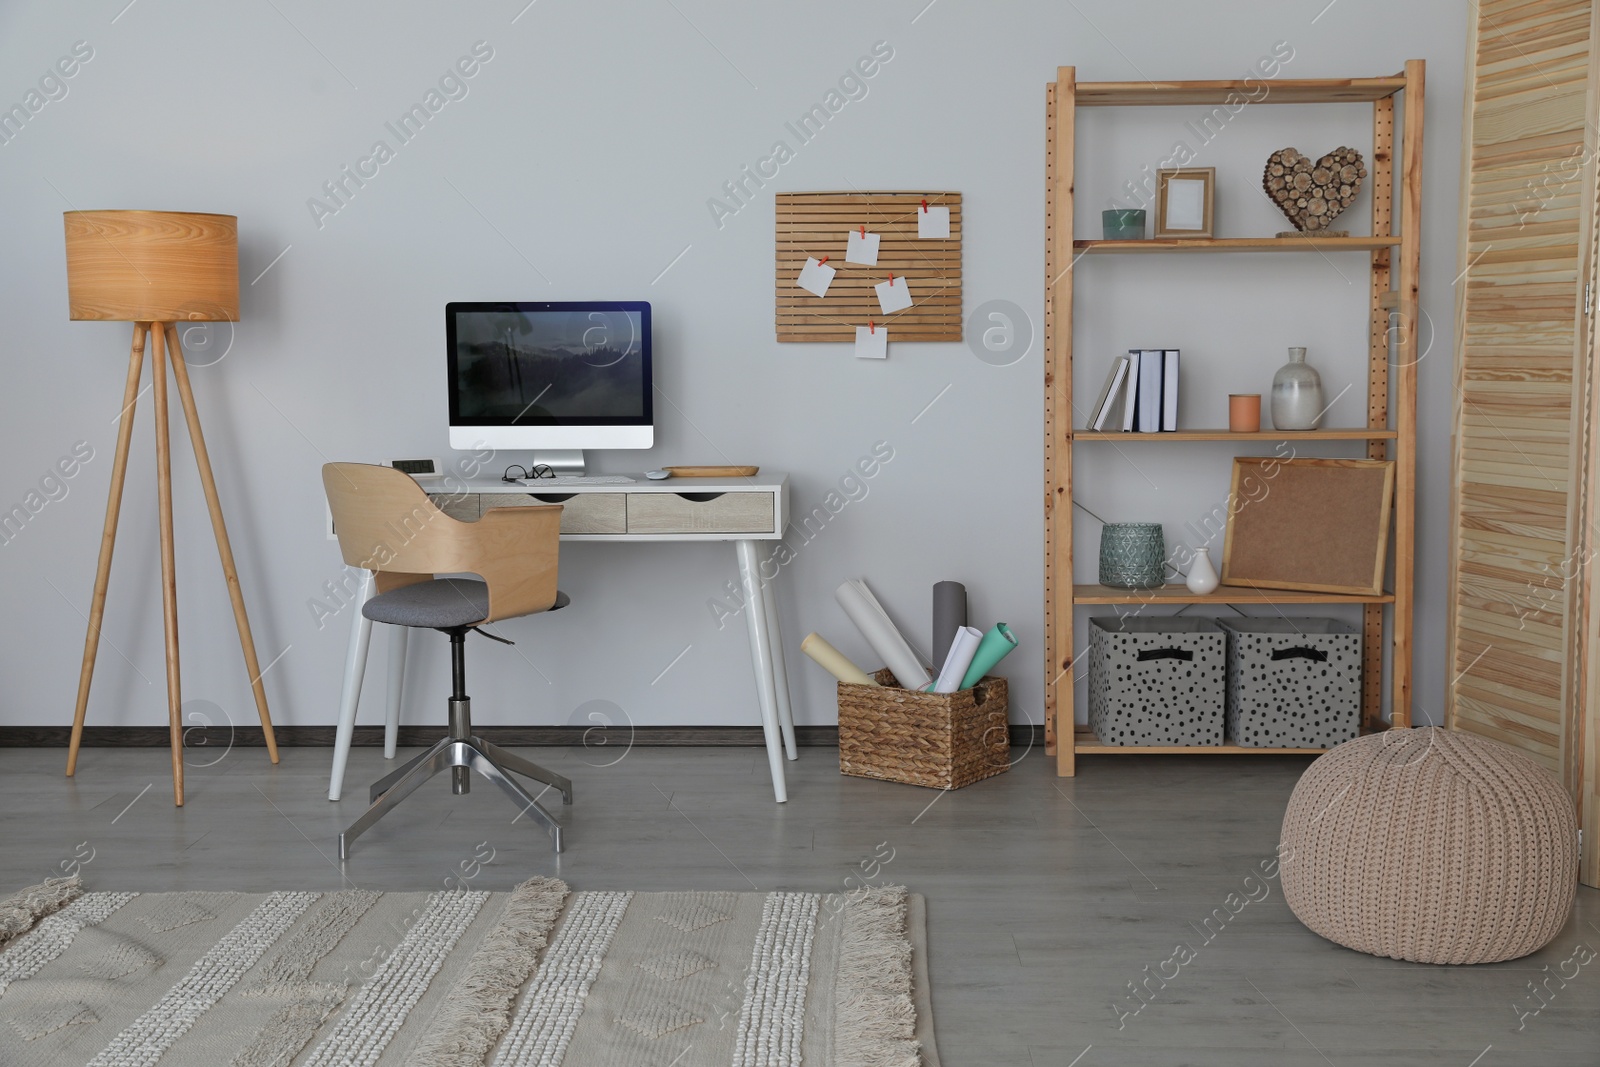 Photo of Stylish room interior with comfortable workplace and shelving unit near white wall